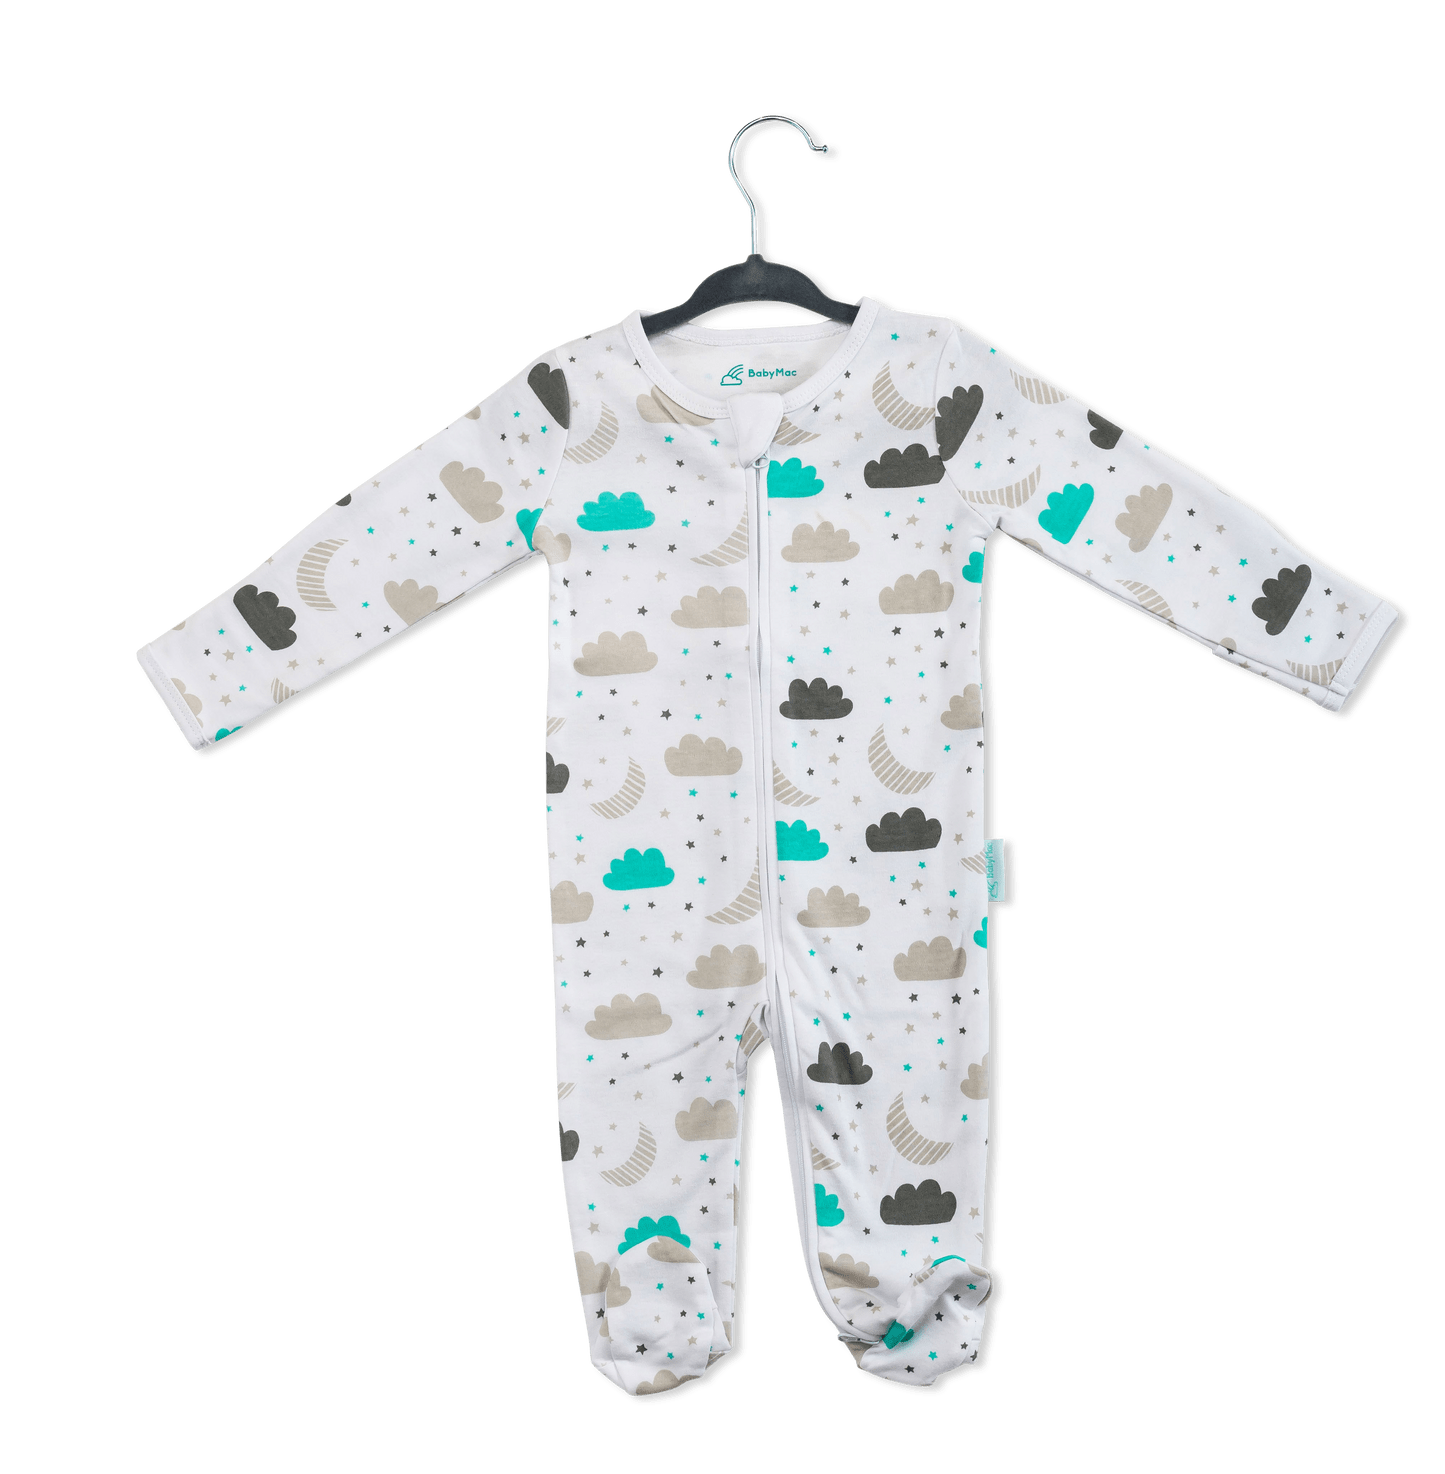 Organic Cotton Double Zip Sleepsuit For Baby By BabyMac - Stylemykid.com